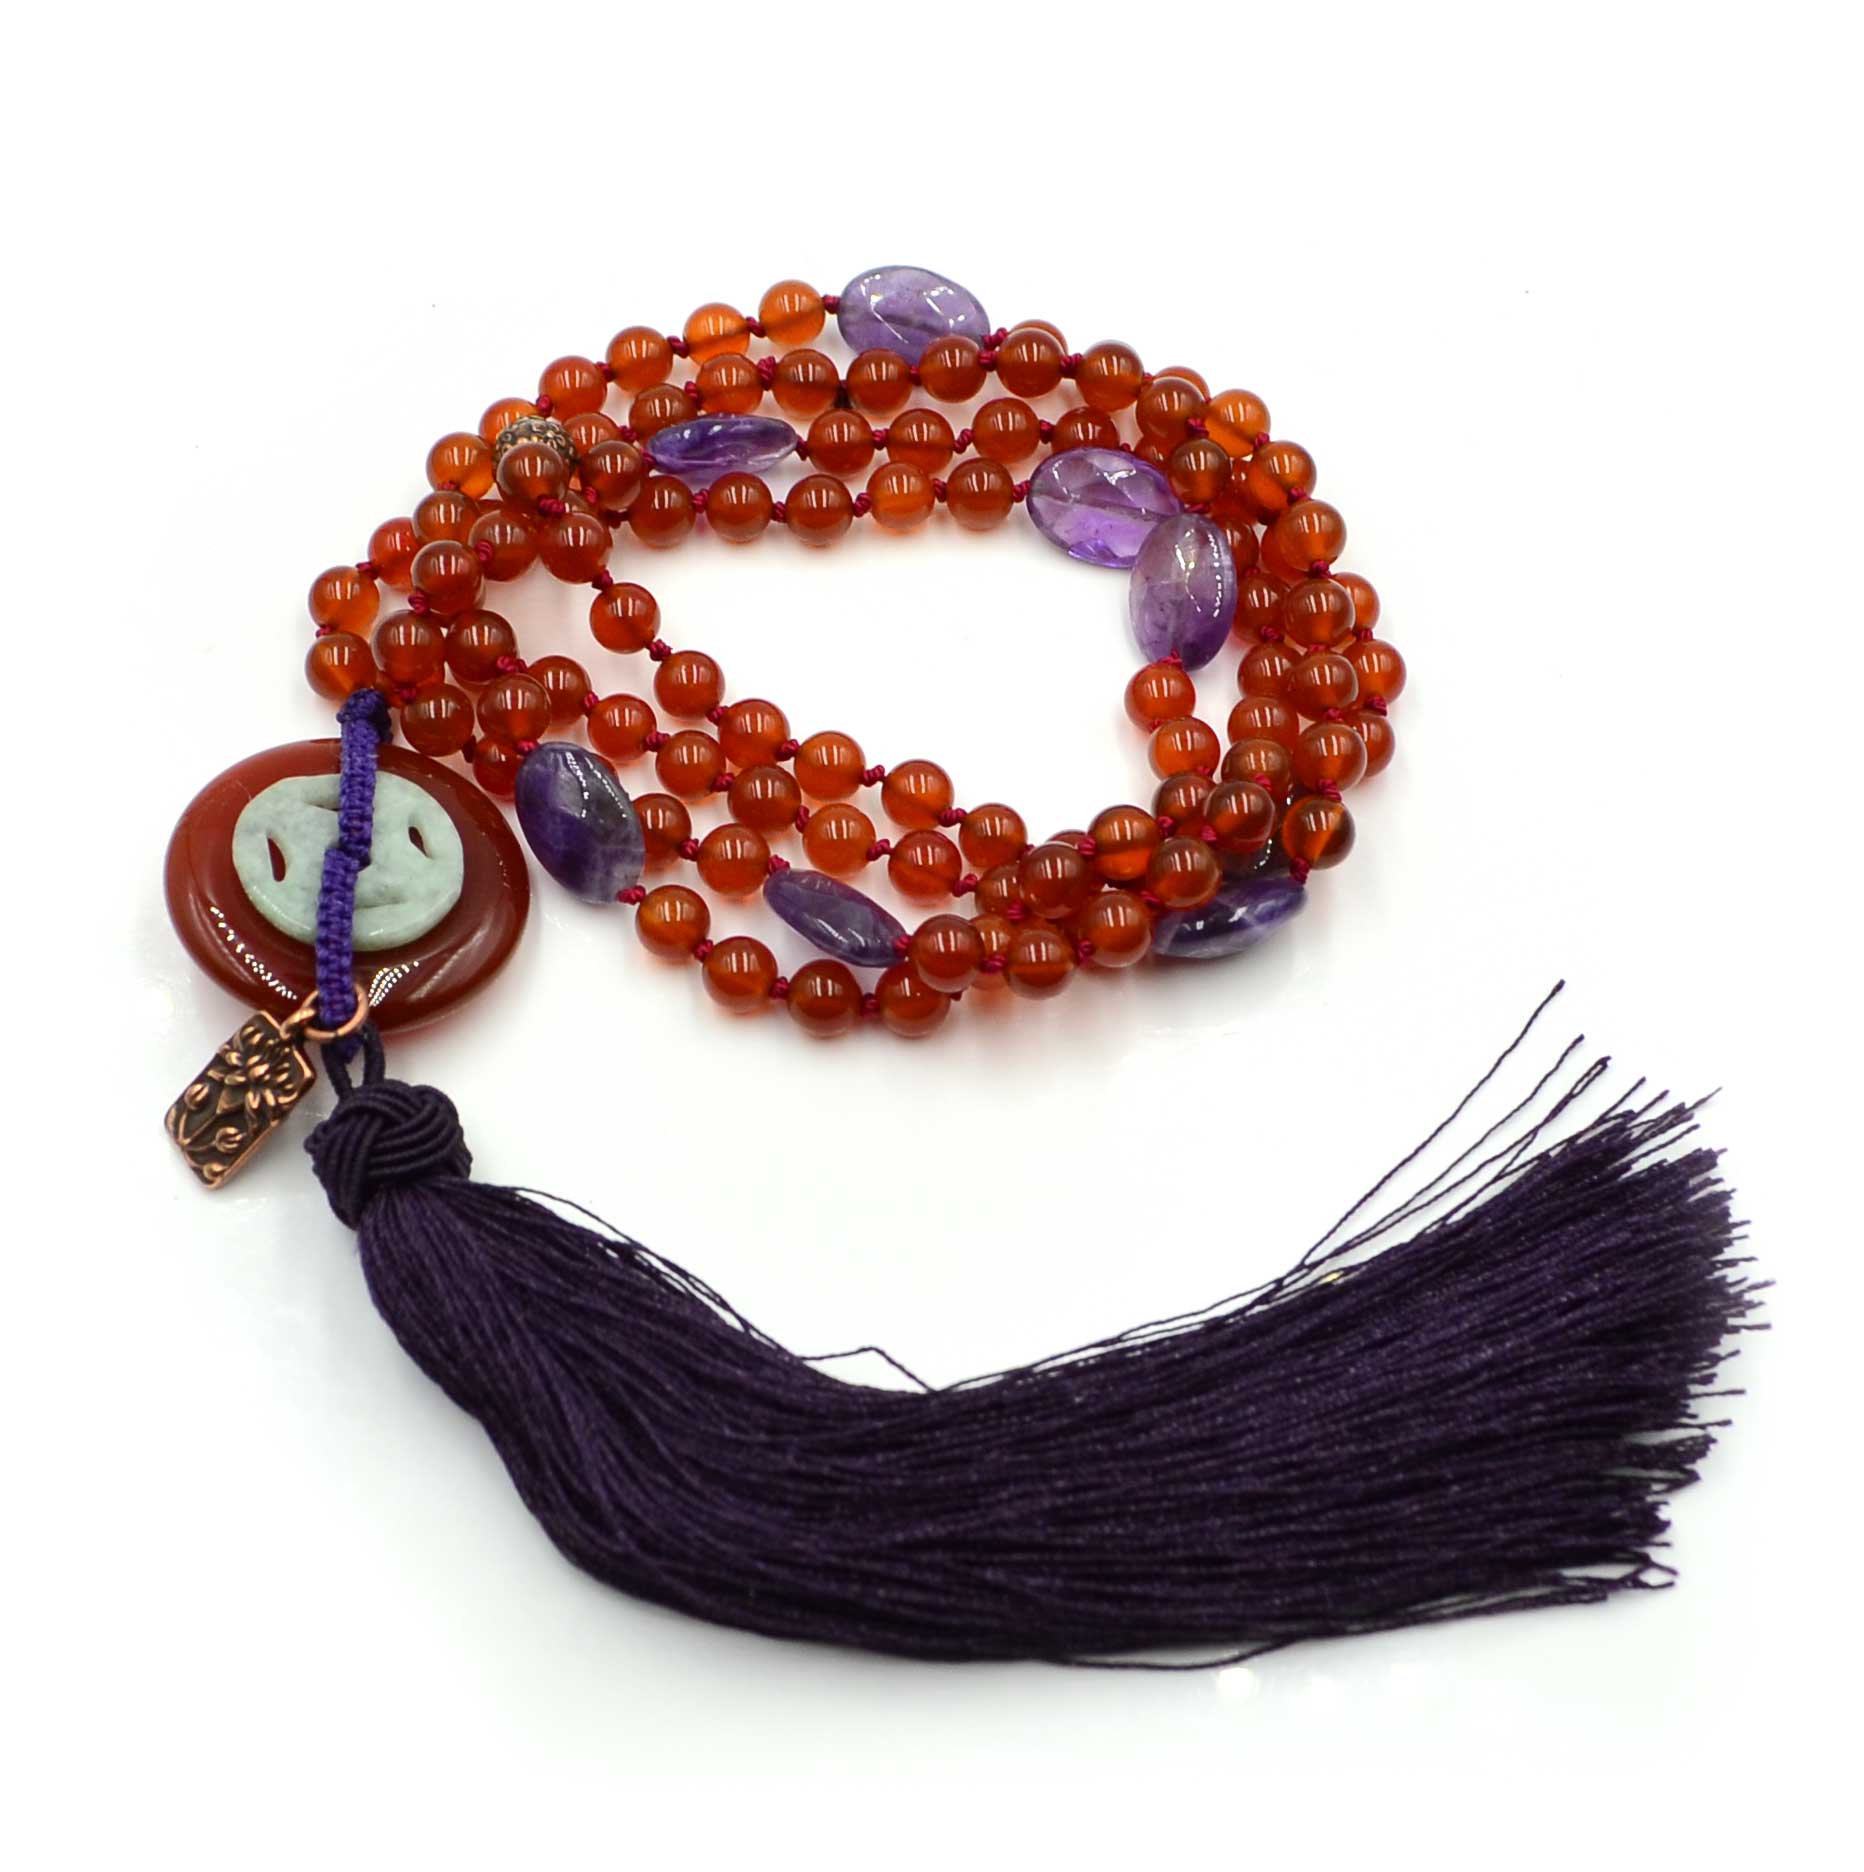 How to Knot a Mala